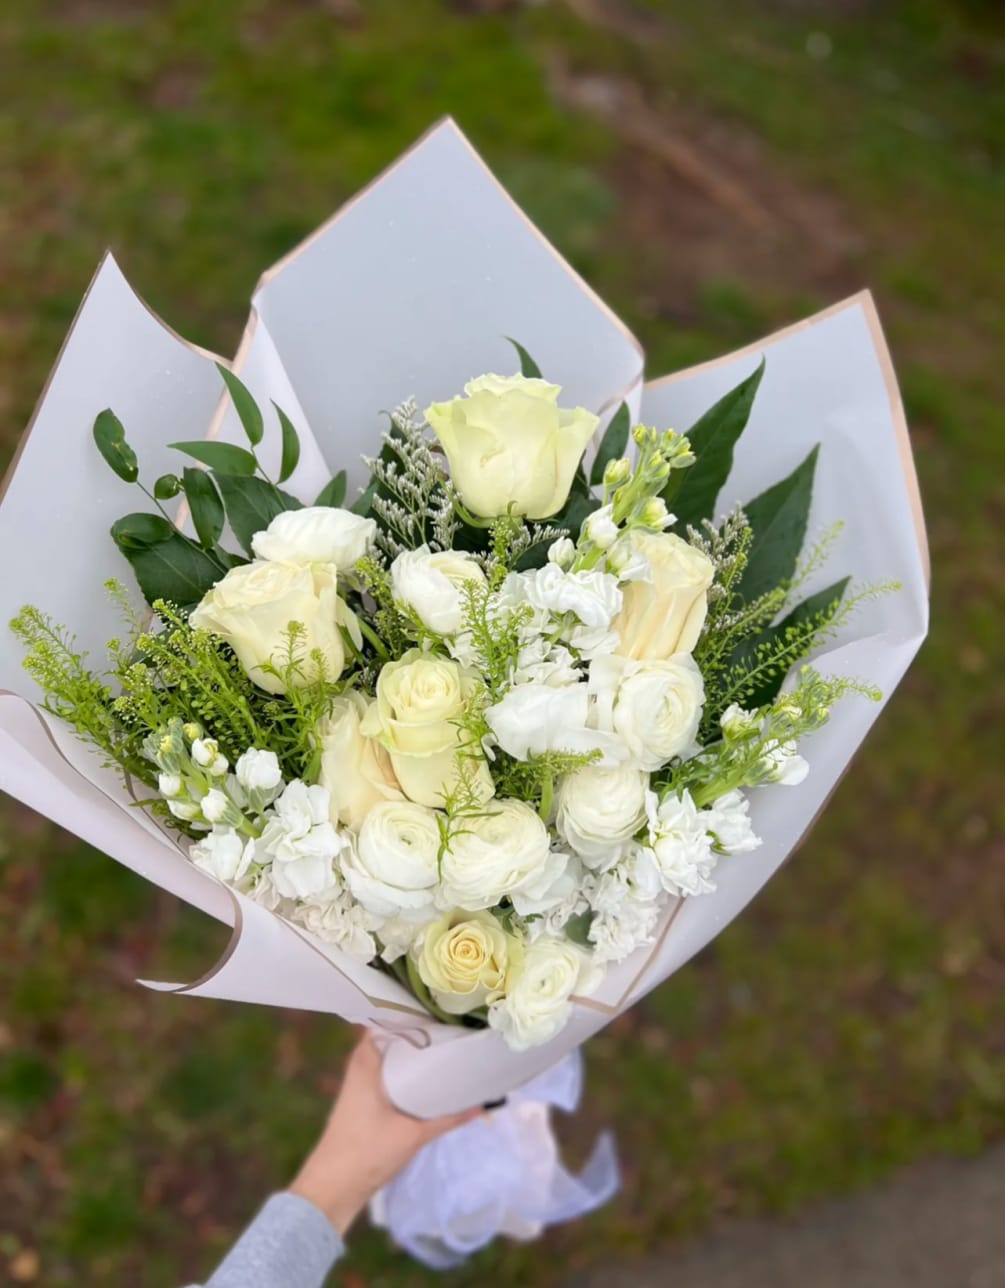 Hand wrapped bouquet, Featuring a simple eye catching white mixed flower bouquet